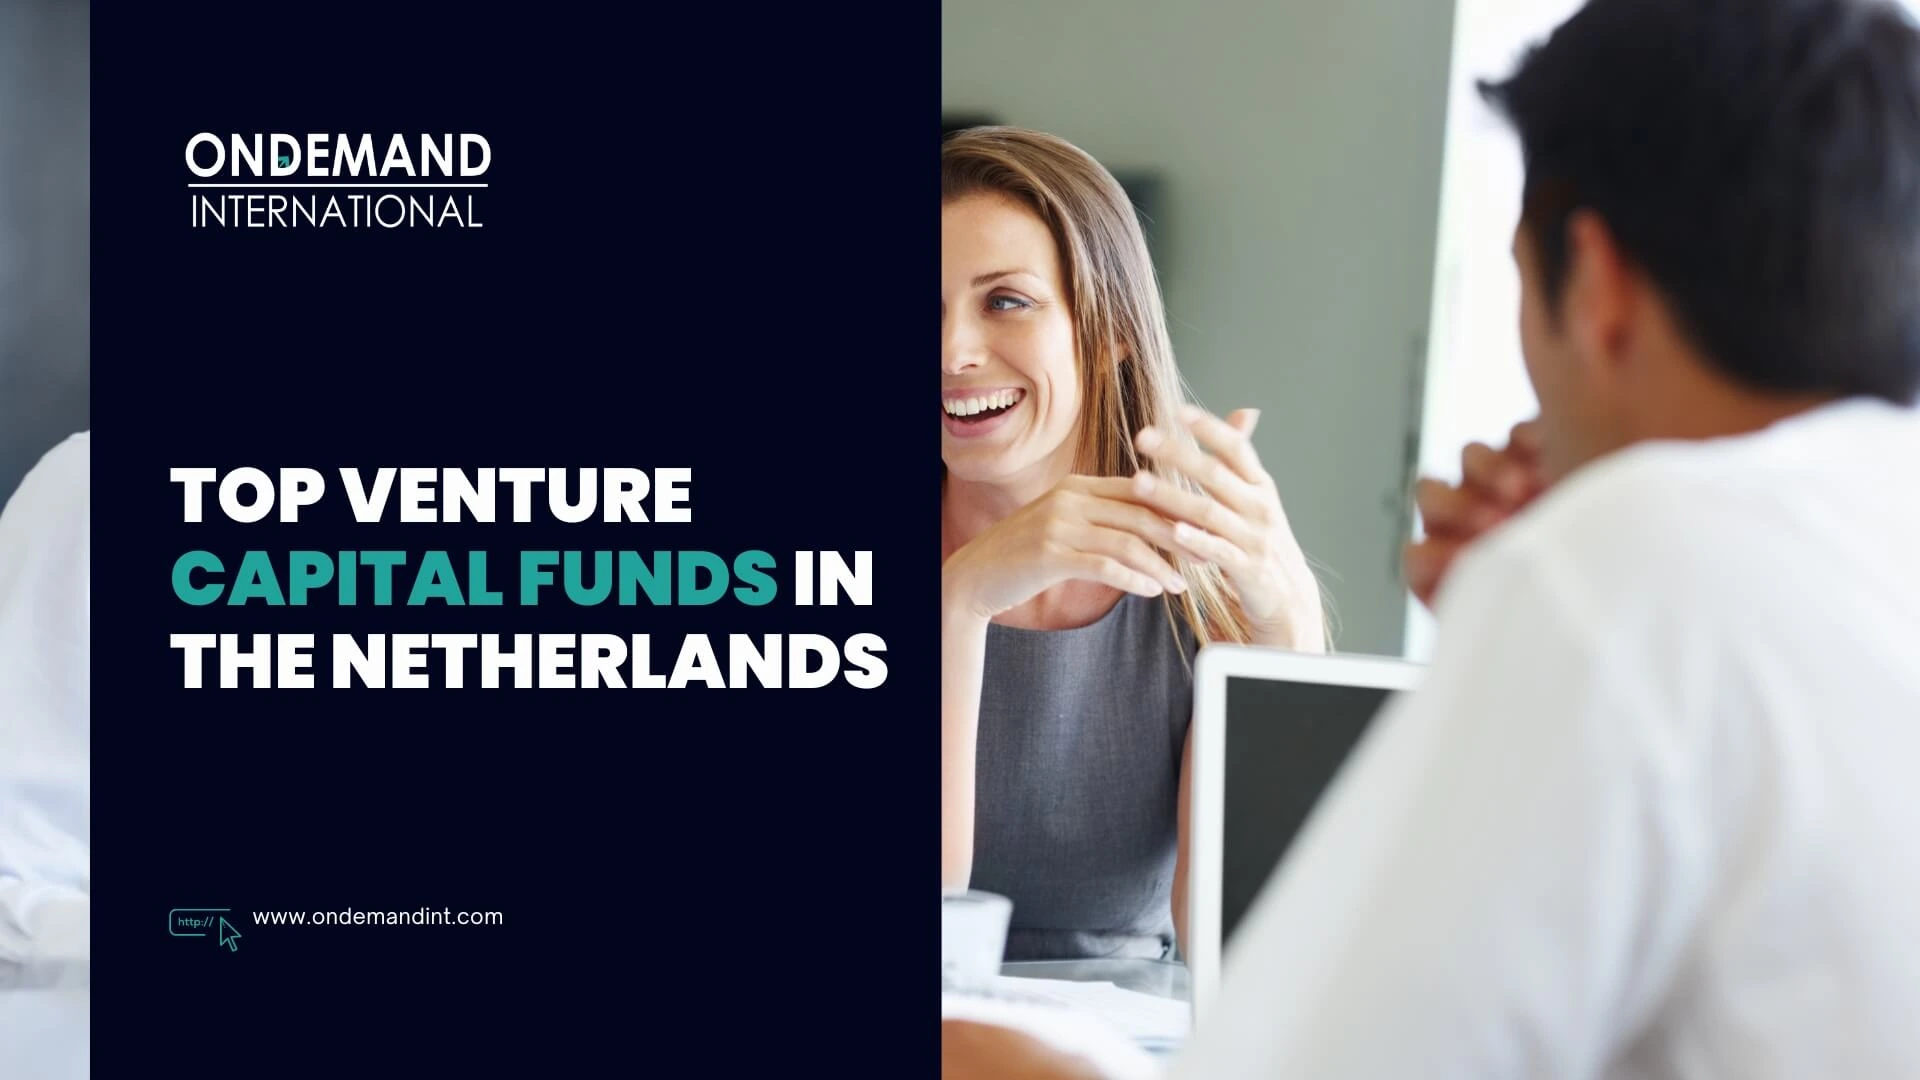 Top Venture Capital Funds in the Netherlands